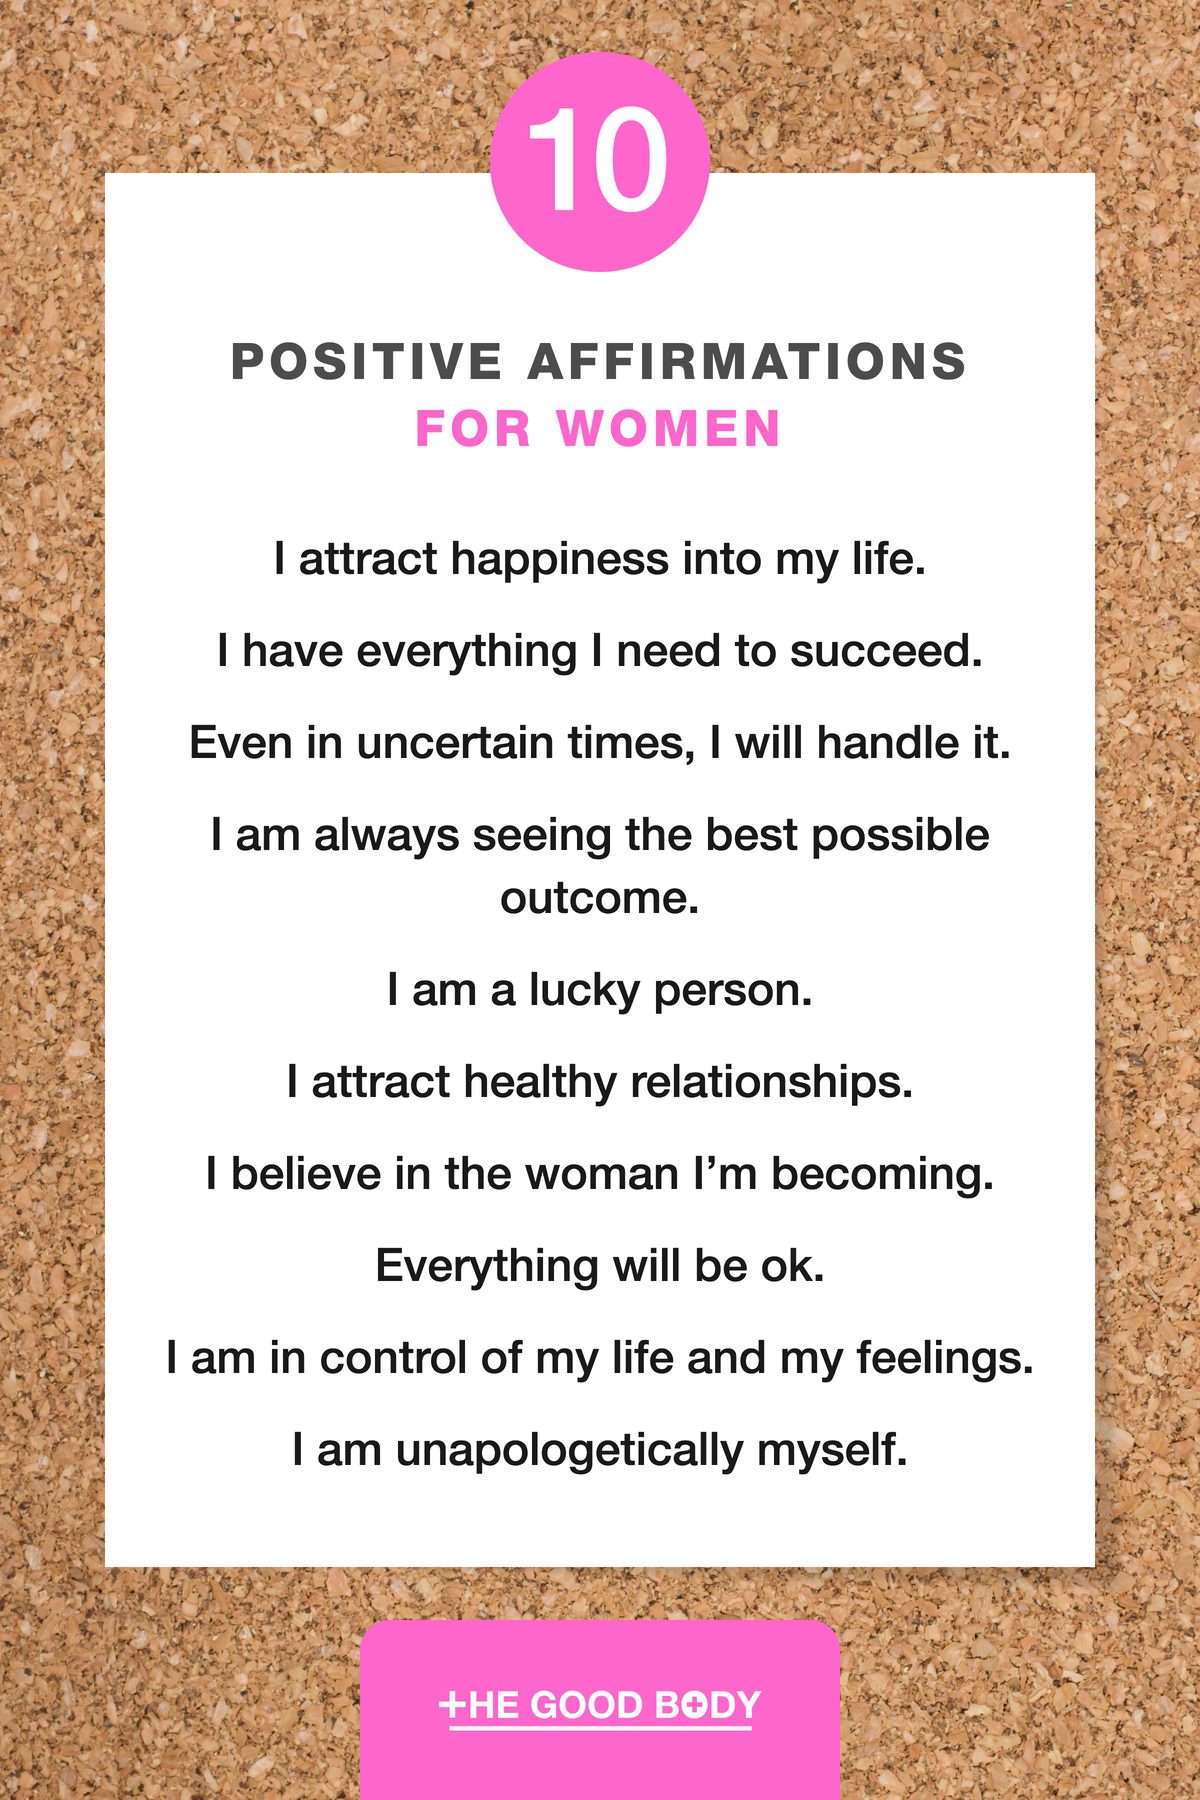 10 Positive Affirmations for Women on White Paper with Cork Background